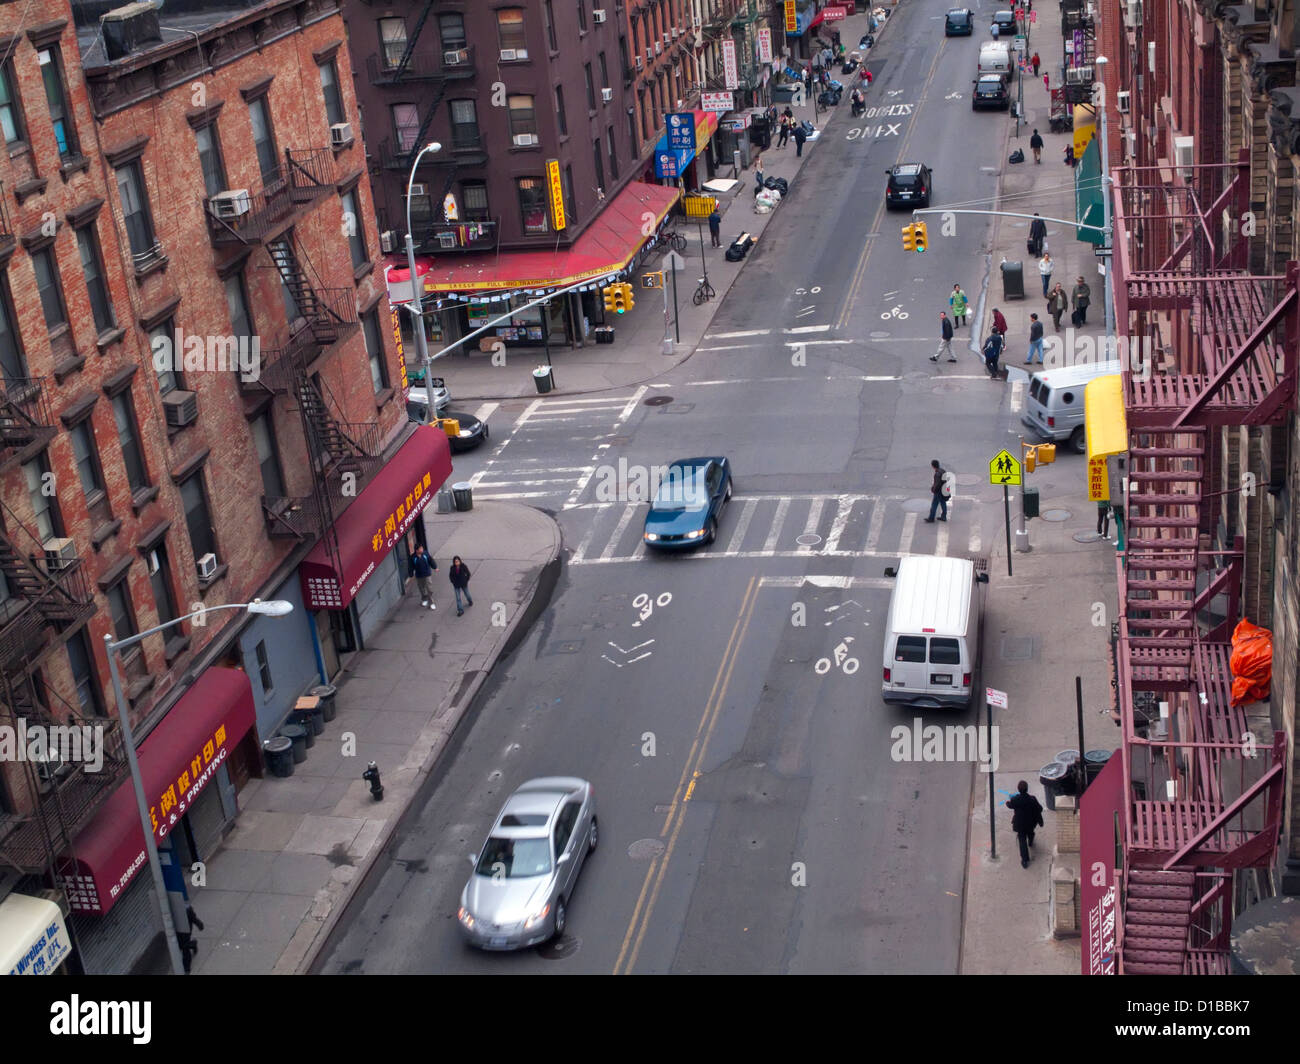 Aerial view of Madison Street in the Two Bridges section of Chinatown, New York City Stock Photo